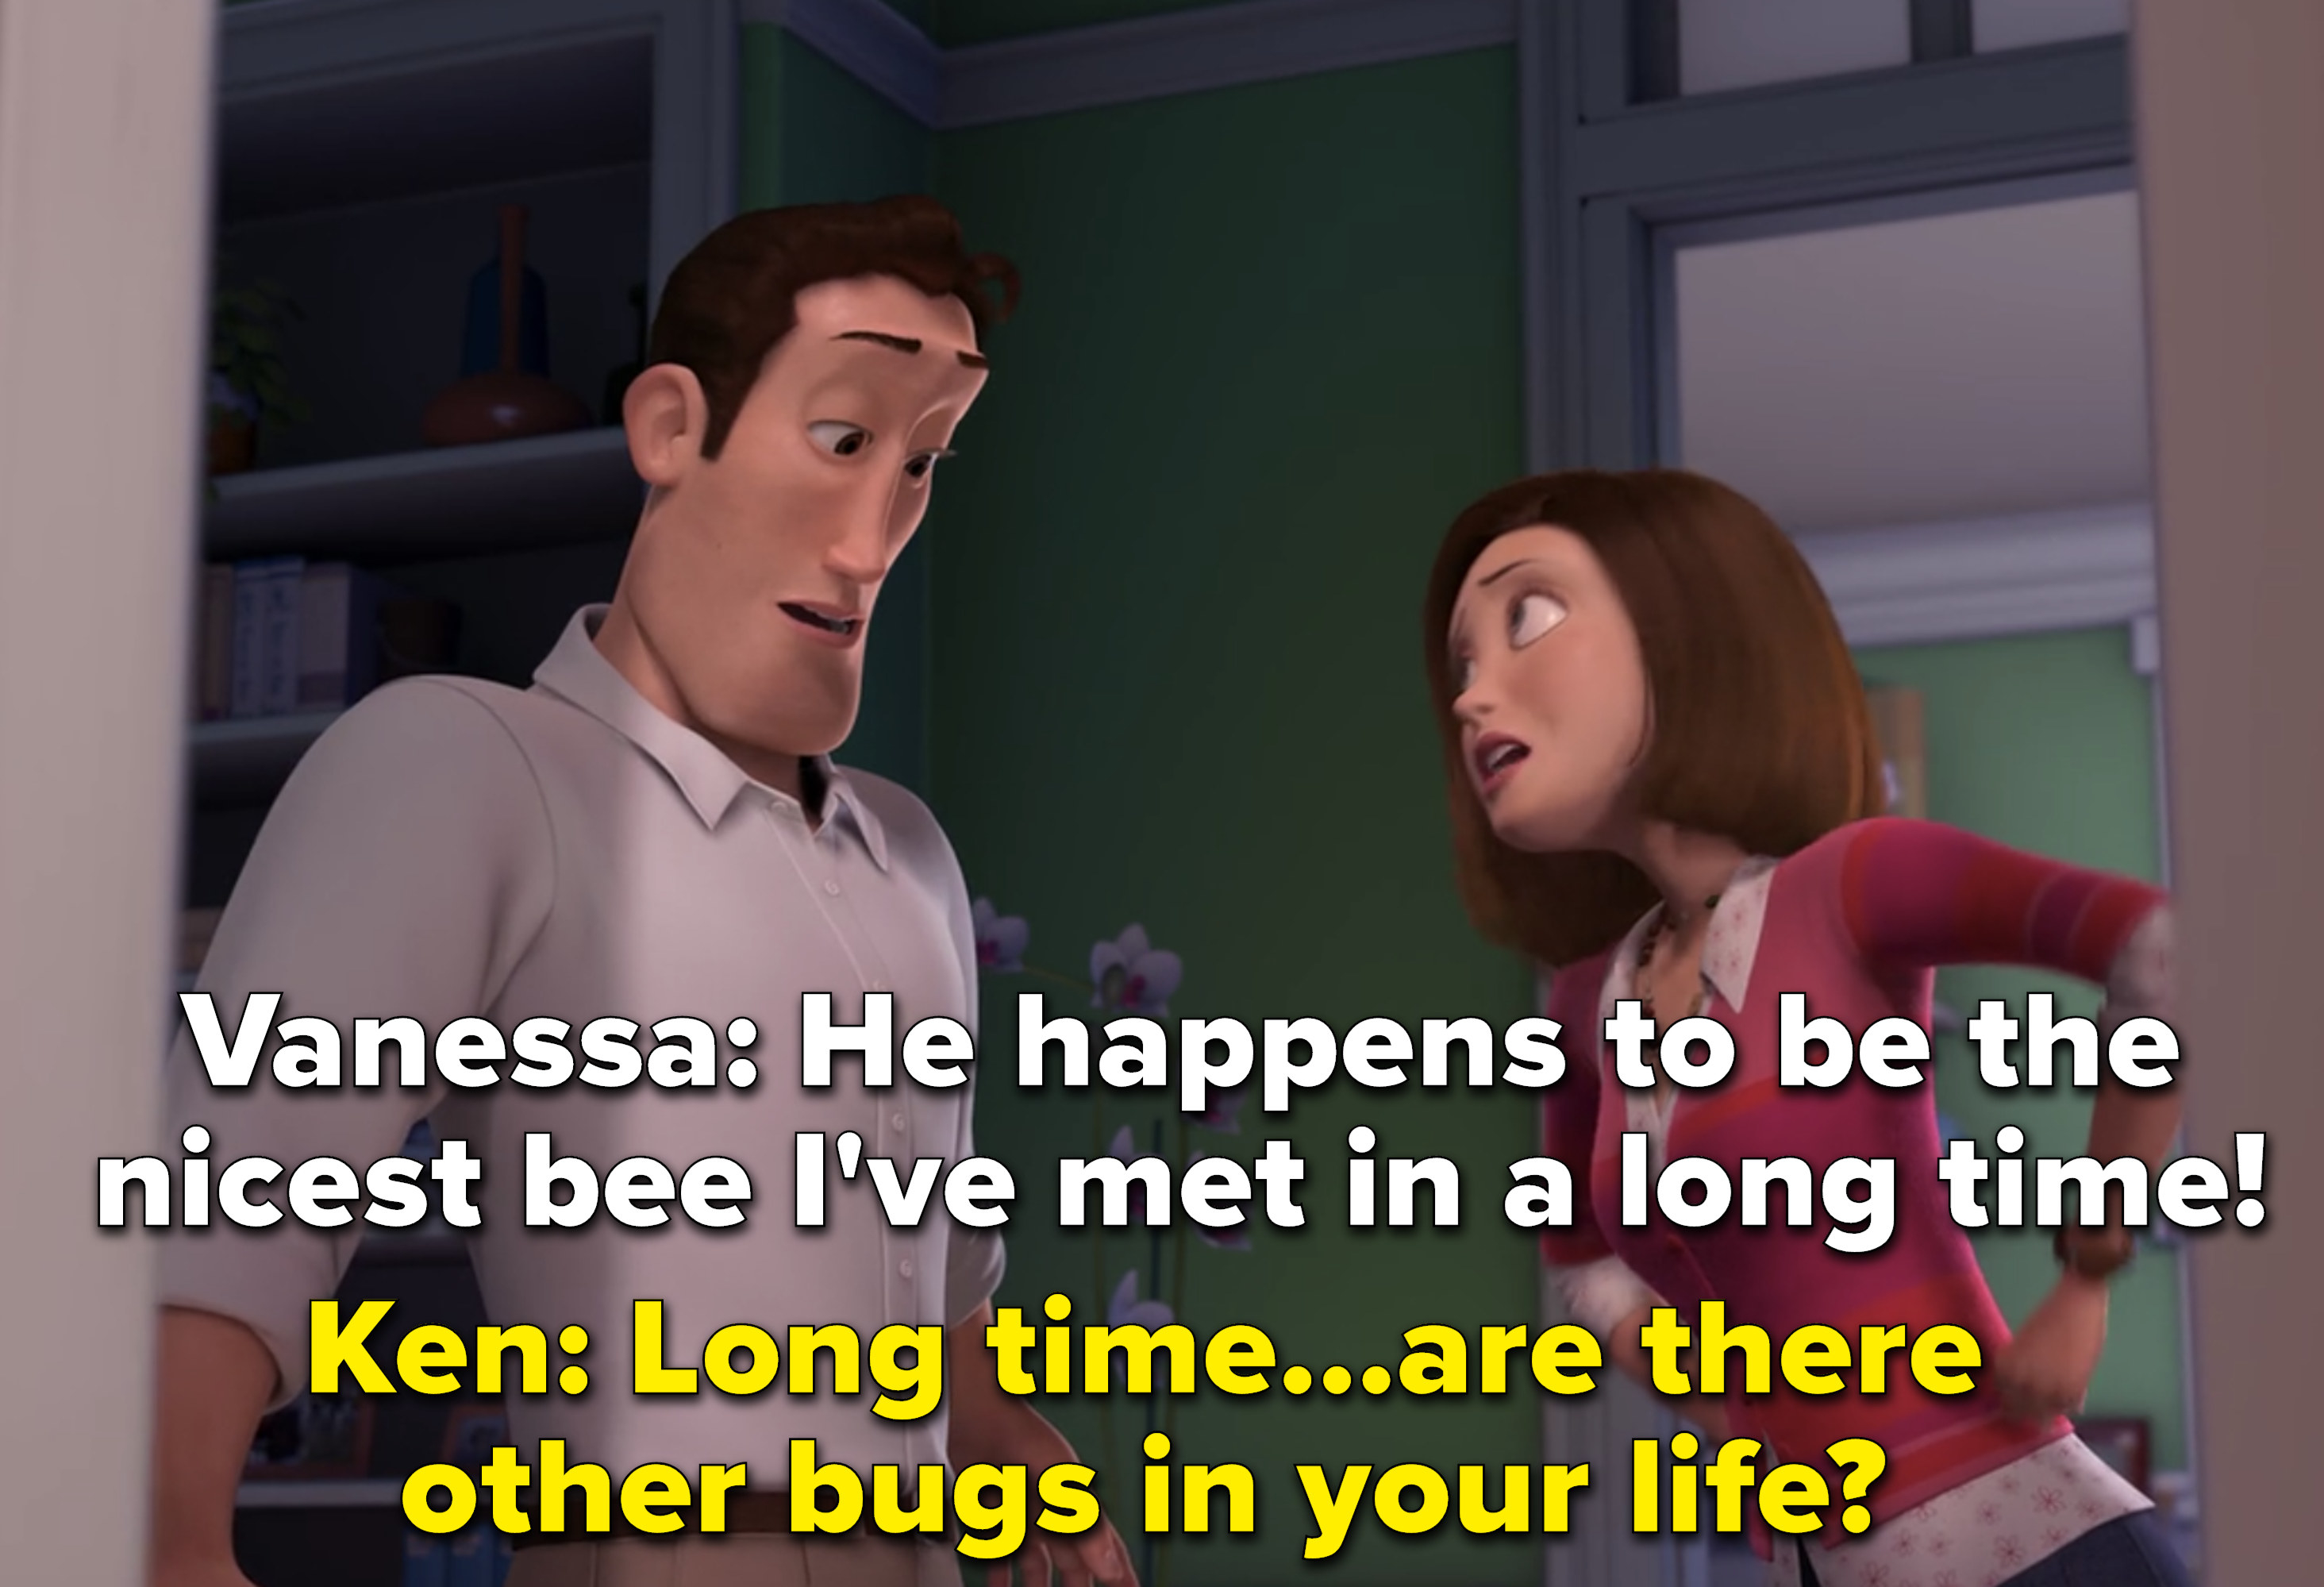 Vanessa says Barry is the nicest bee she&#x27;s met in a long time and Ken asks if there are other bugs in her life